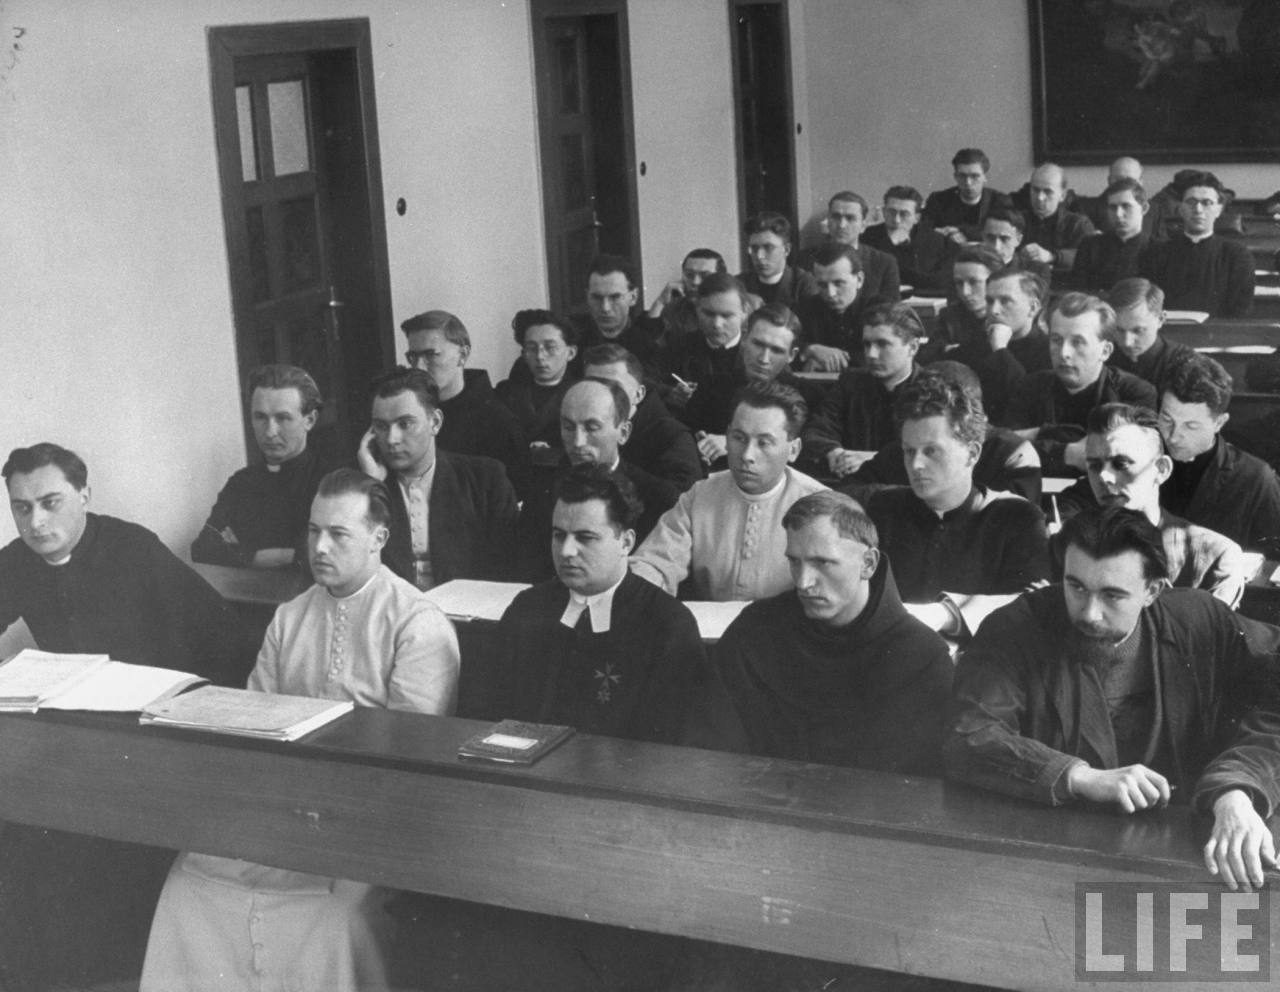 Students from seminary at Charles University and members of Franciscan and other religious orders at the university attending lecture on Kant by theology faculty professor.